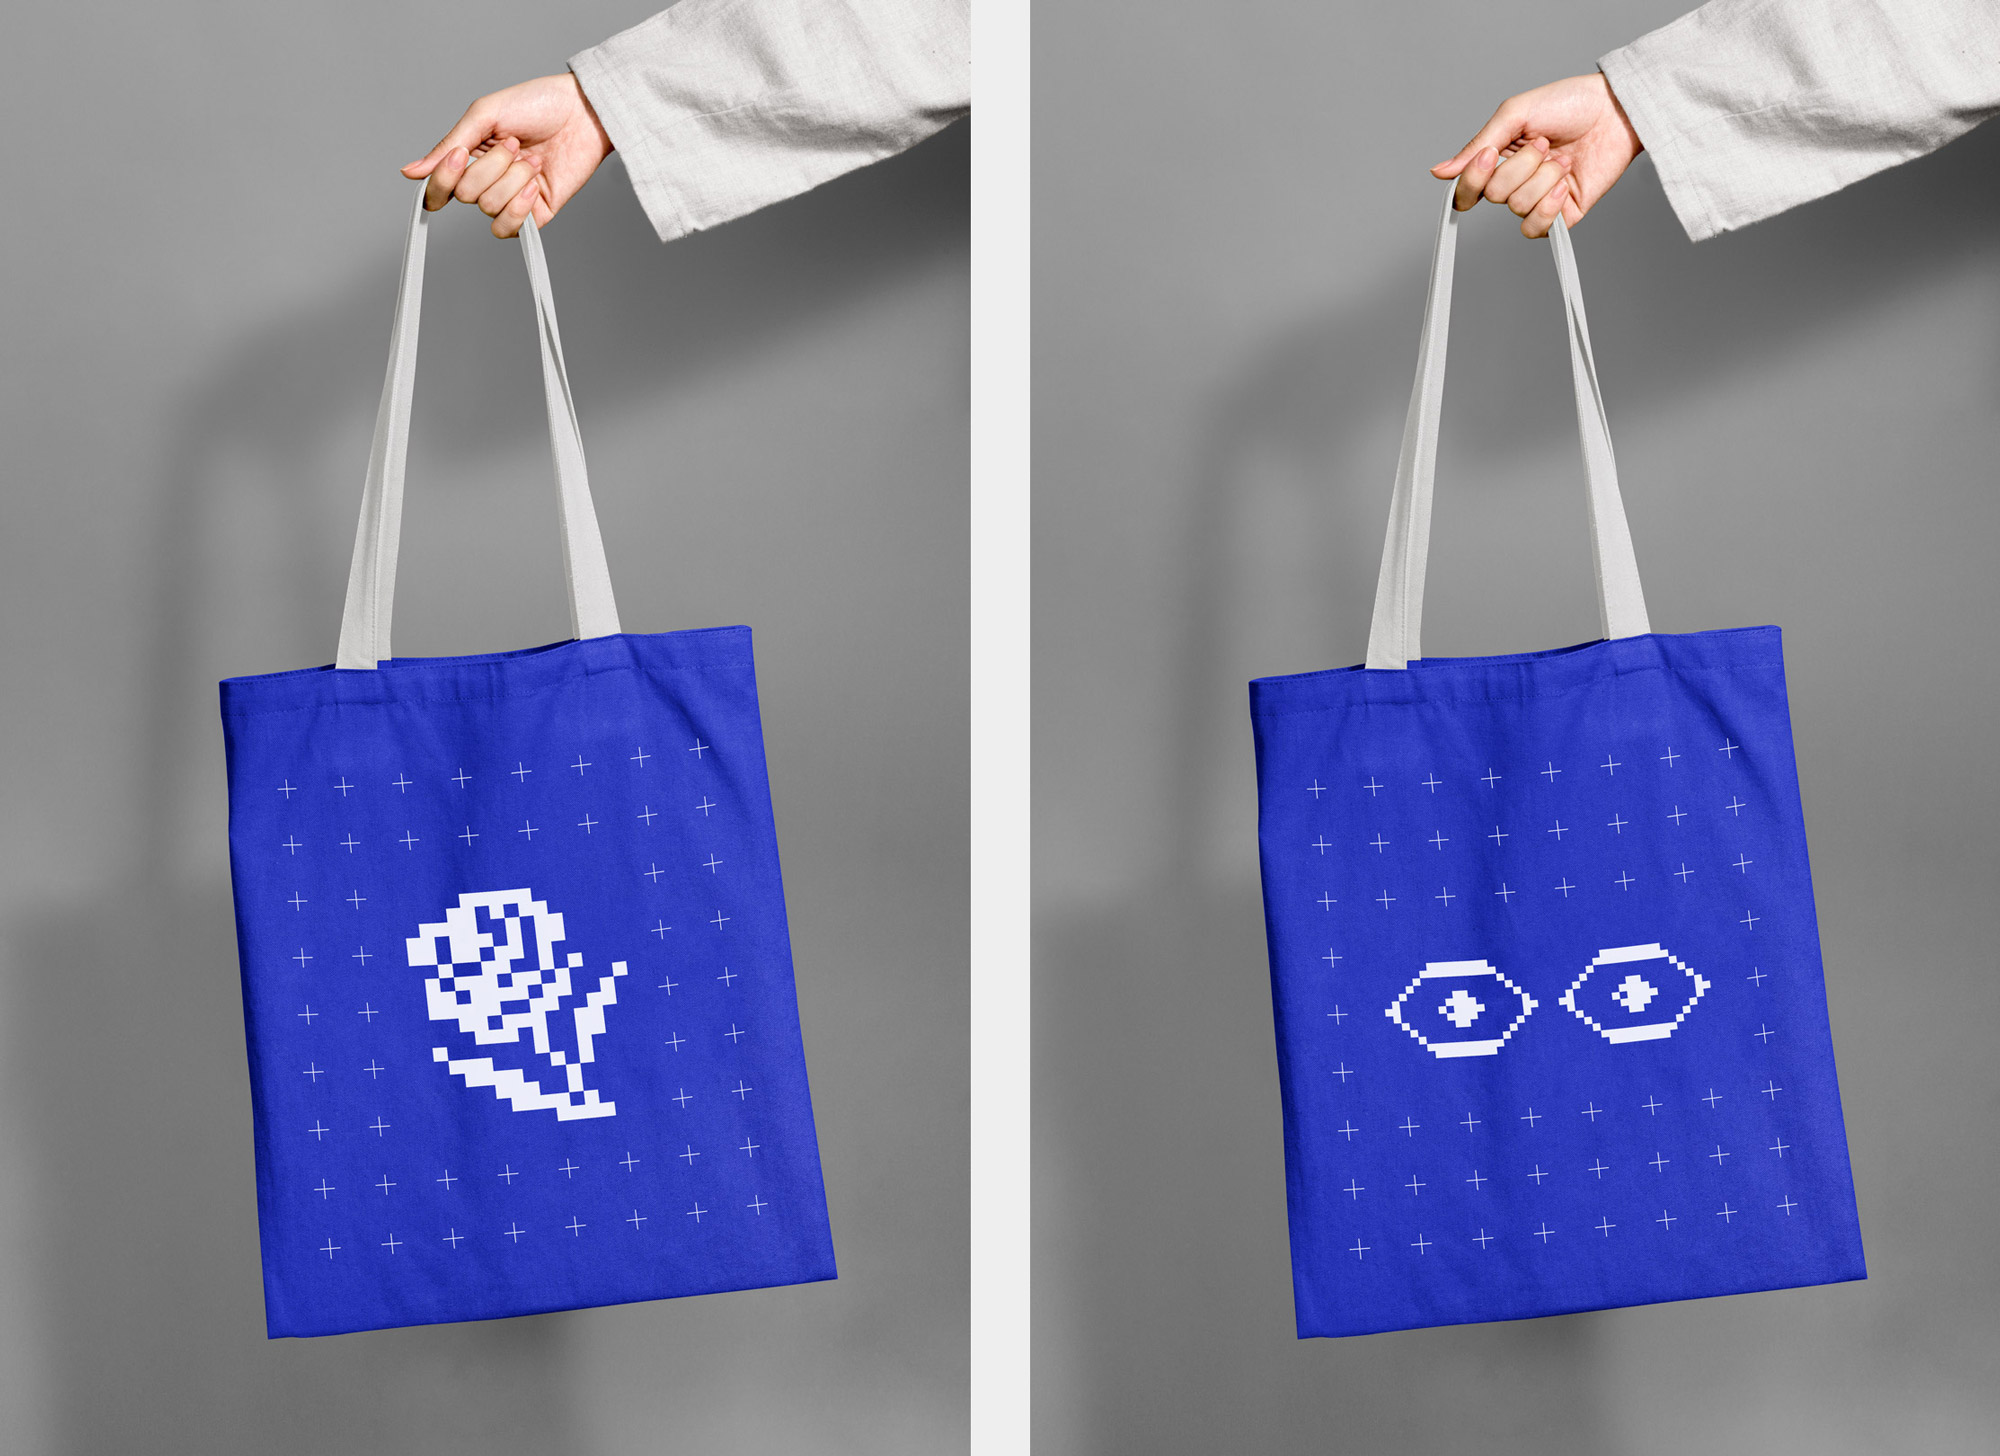 Tote bags with festival graphics.